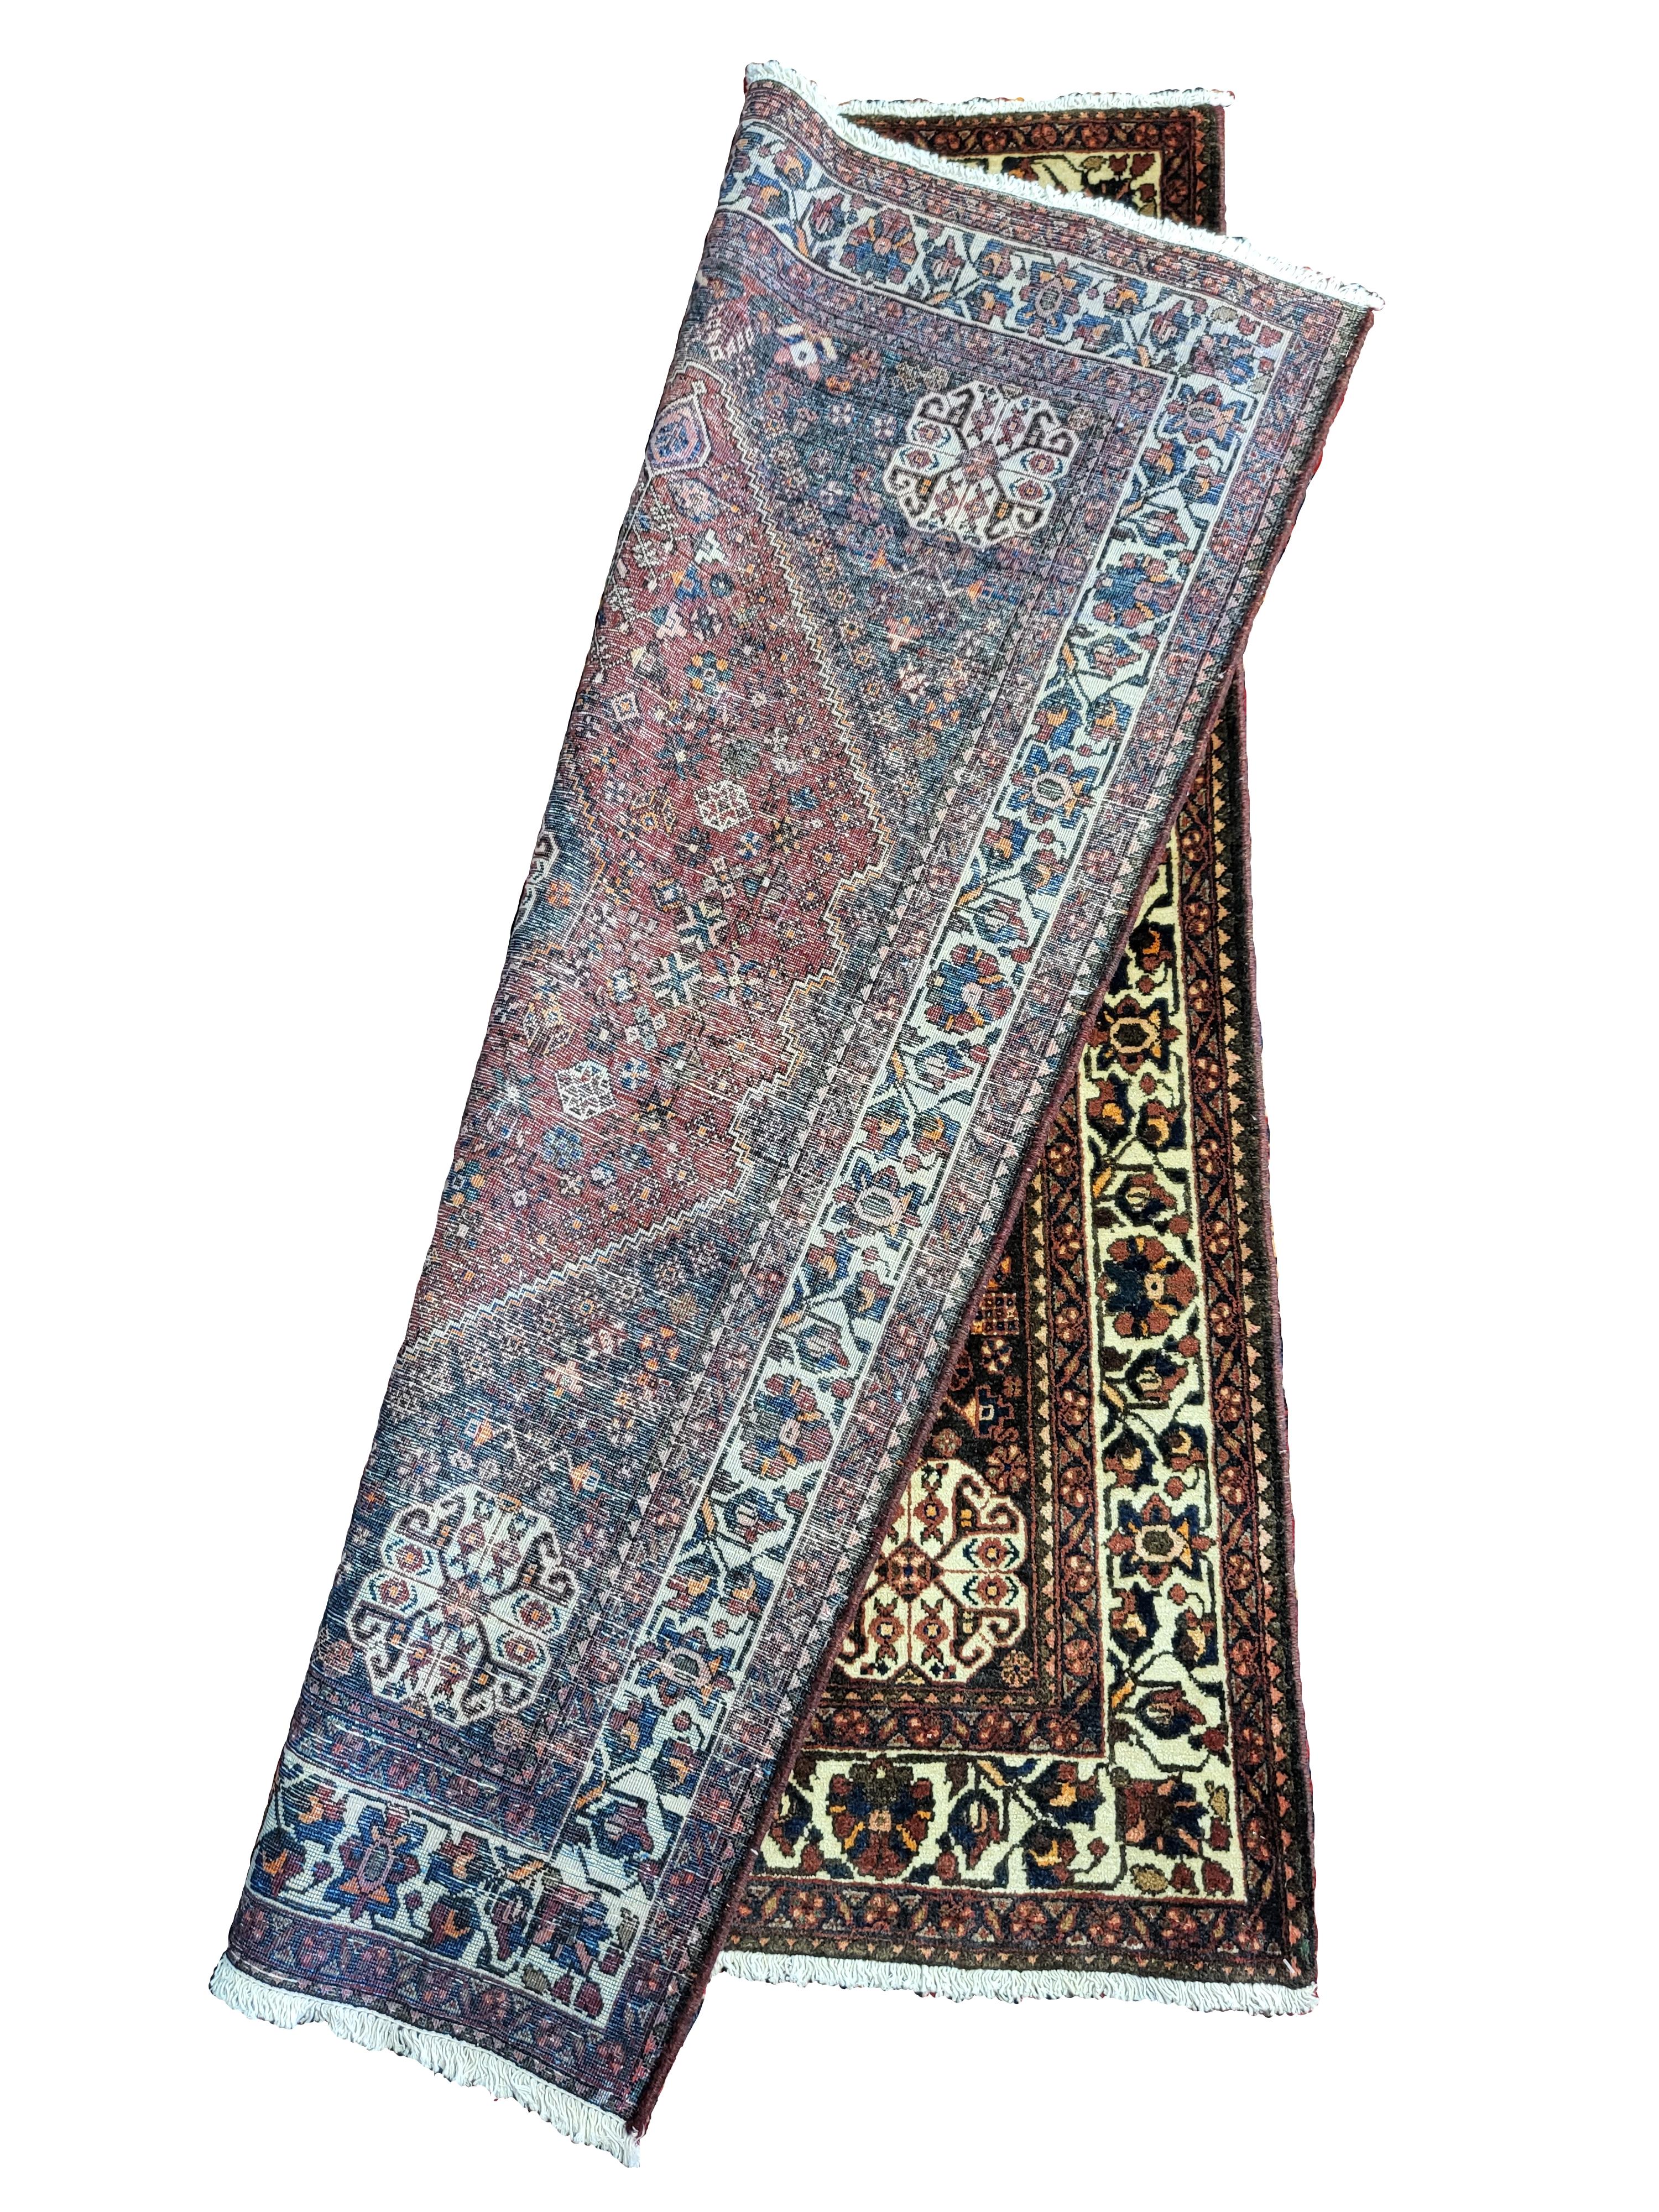 Pristine Early 1900's Persian Abadeh - Tribal Style Rug - Dark Rust, Deep Navy In Excellent Condition For Sale In Blacksburg, VA